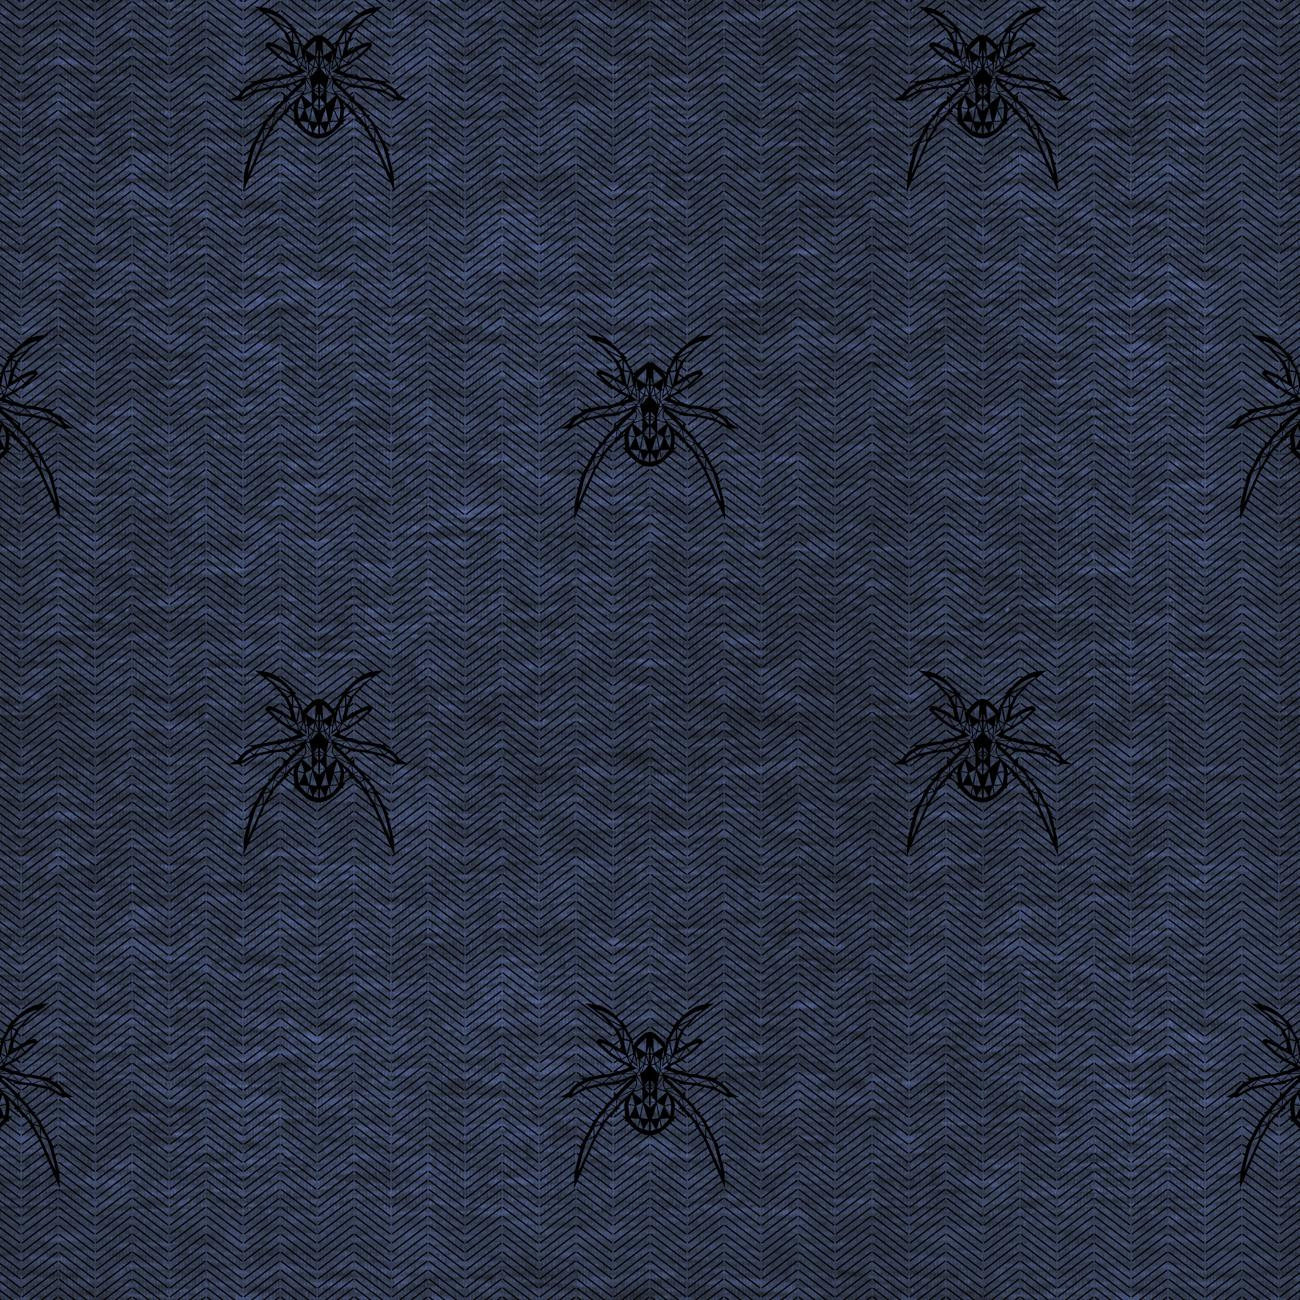 SPIDER / NIGHT CALL / jeans